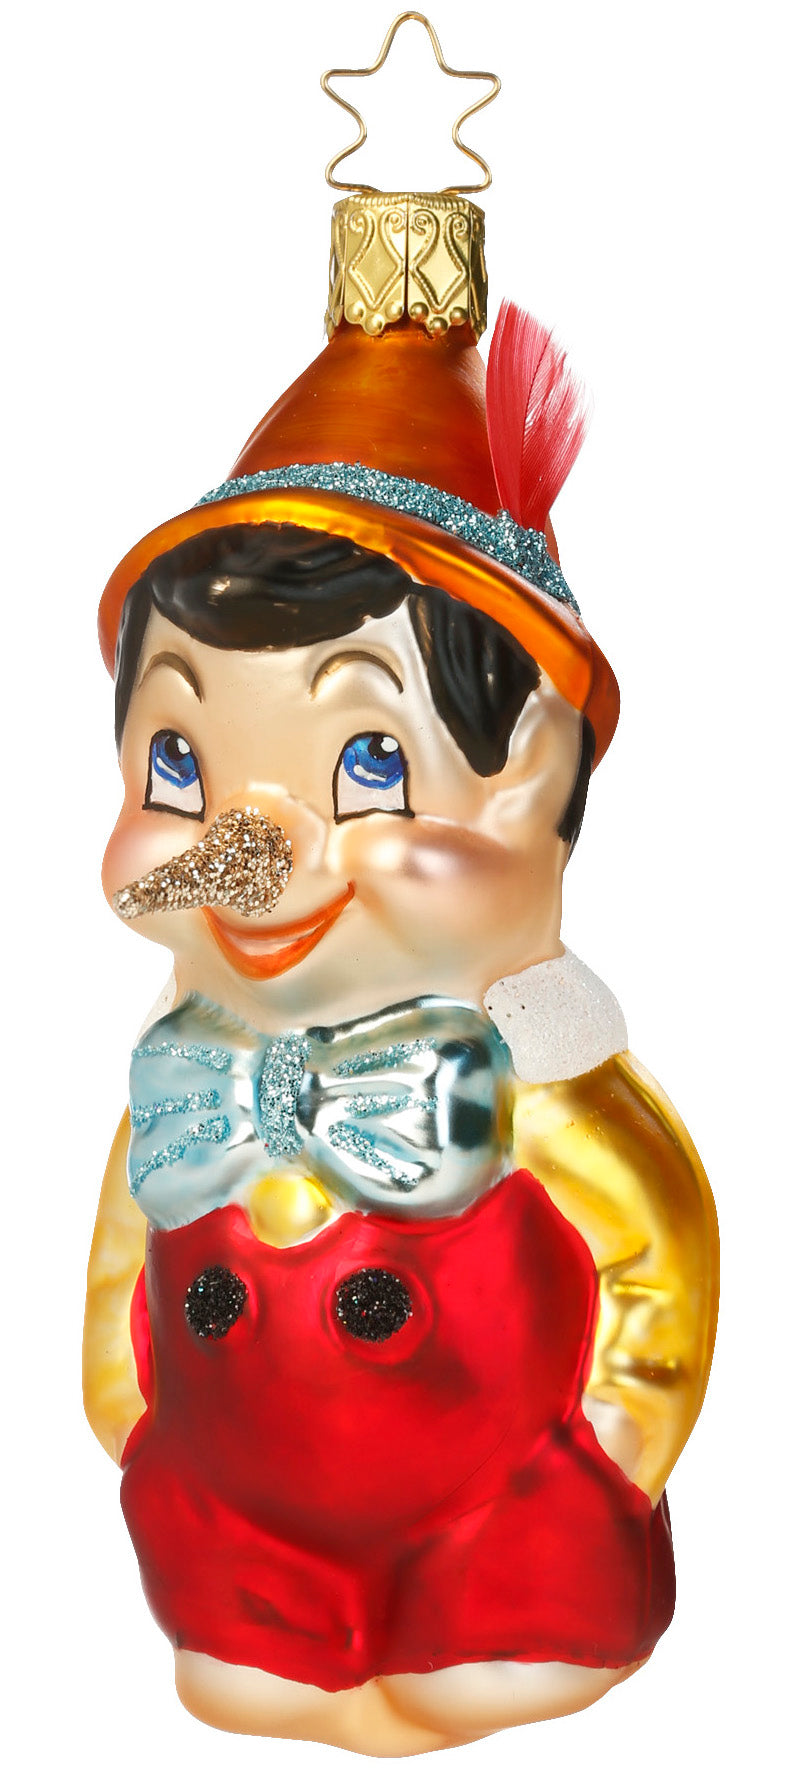 Pinocchio Ornament by Inge Glass